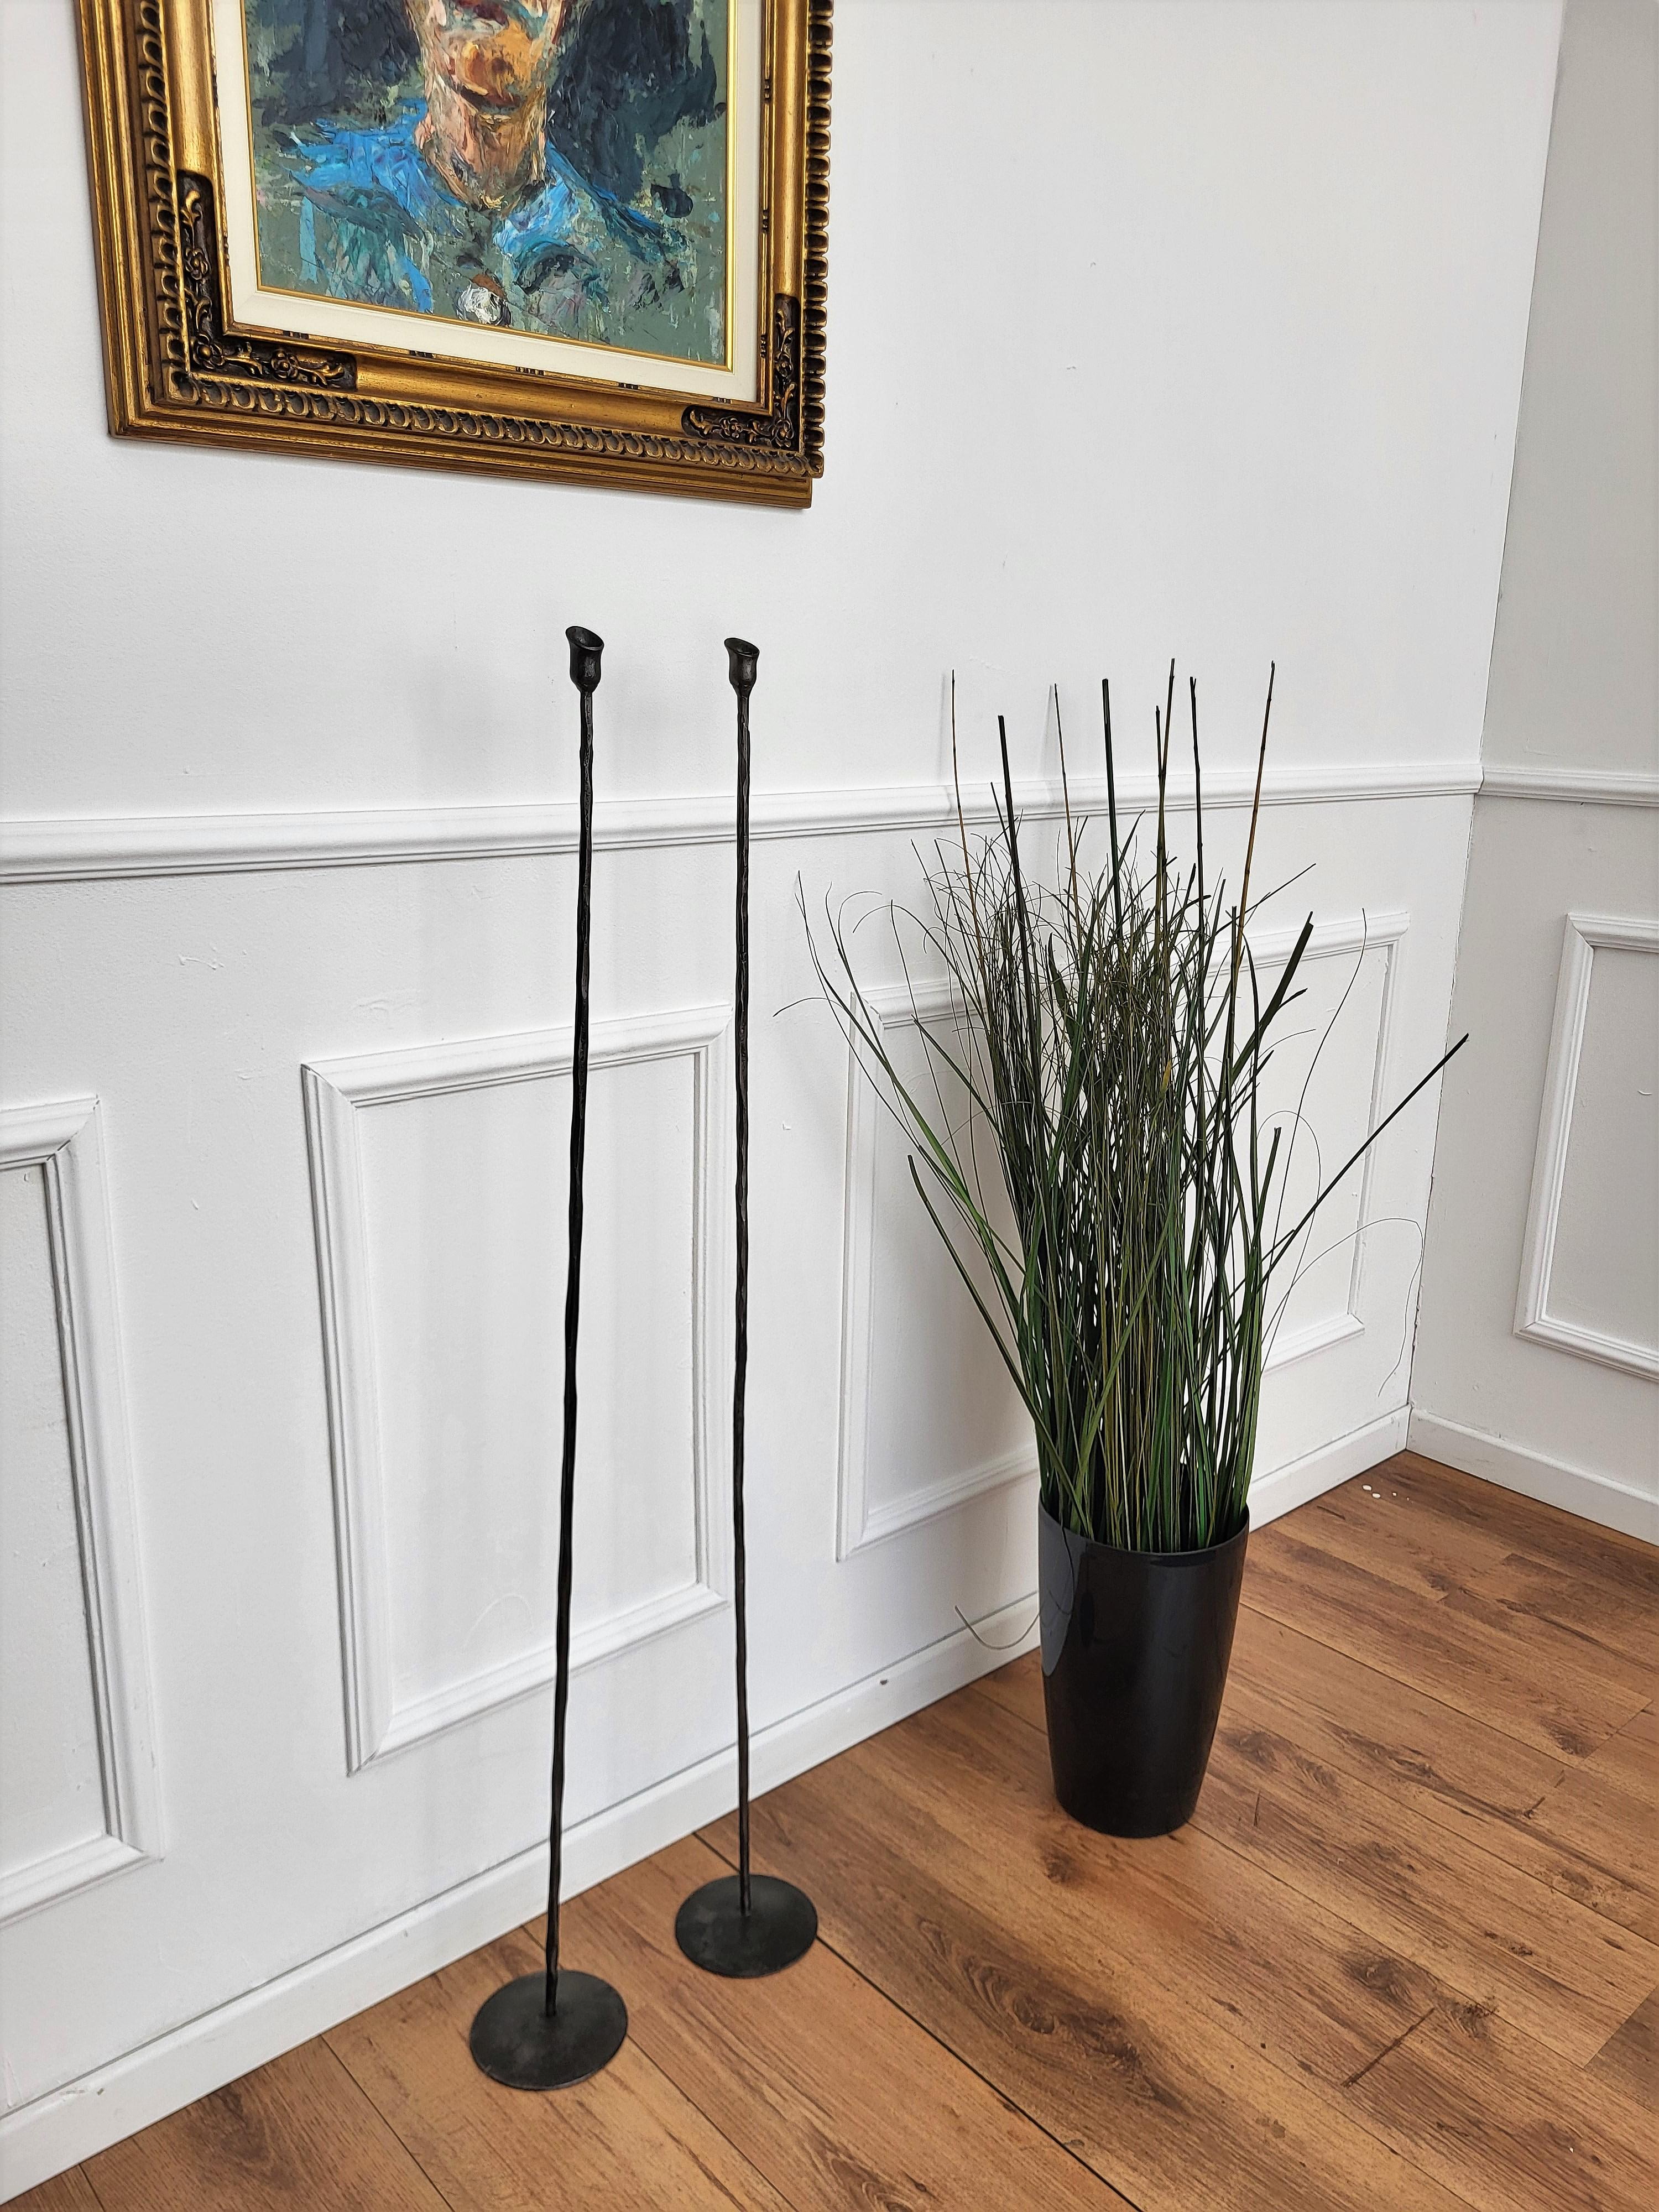 Italian Pair of Wrought Iron Tall Floor Candle Holders in Brutalist Giacometti Style For Sale